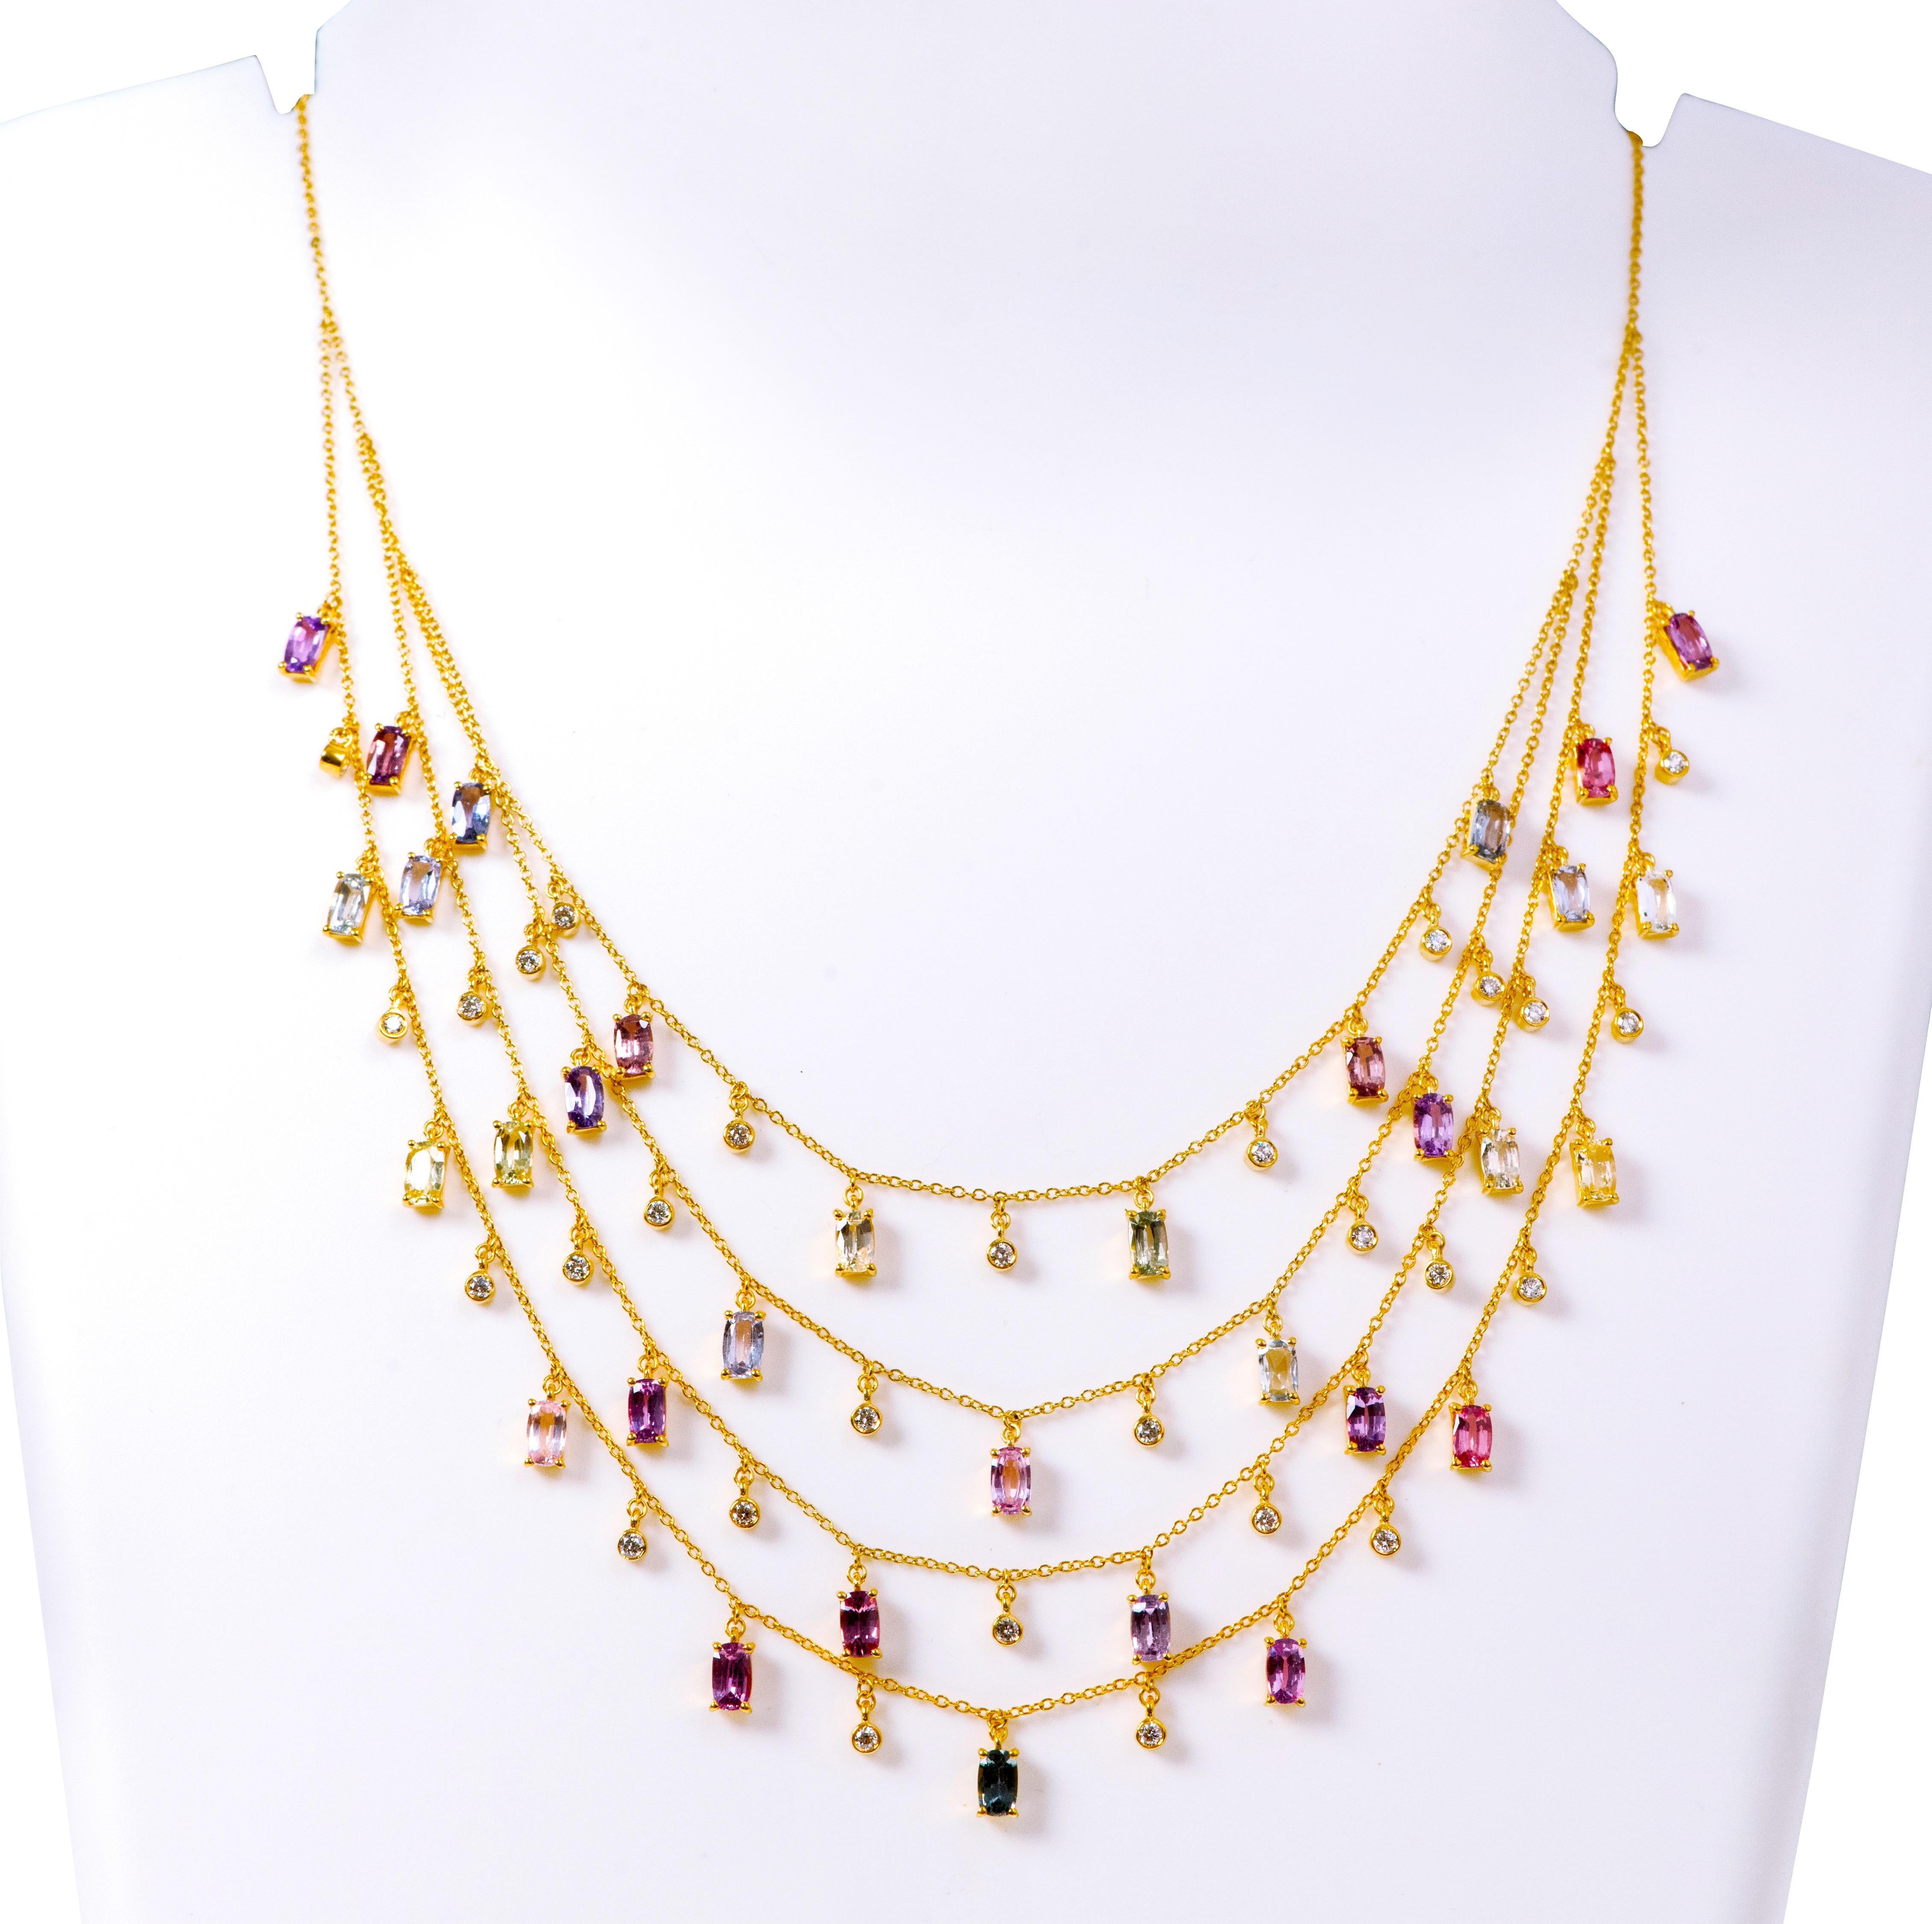 Contemporary 18 Karat Yellow Gold 10.09 Carat Sapphire and Diamond Multi-Strand Necklace For Sale